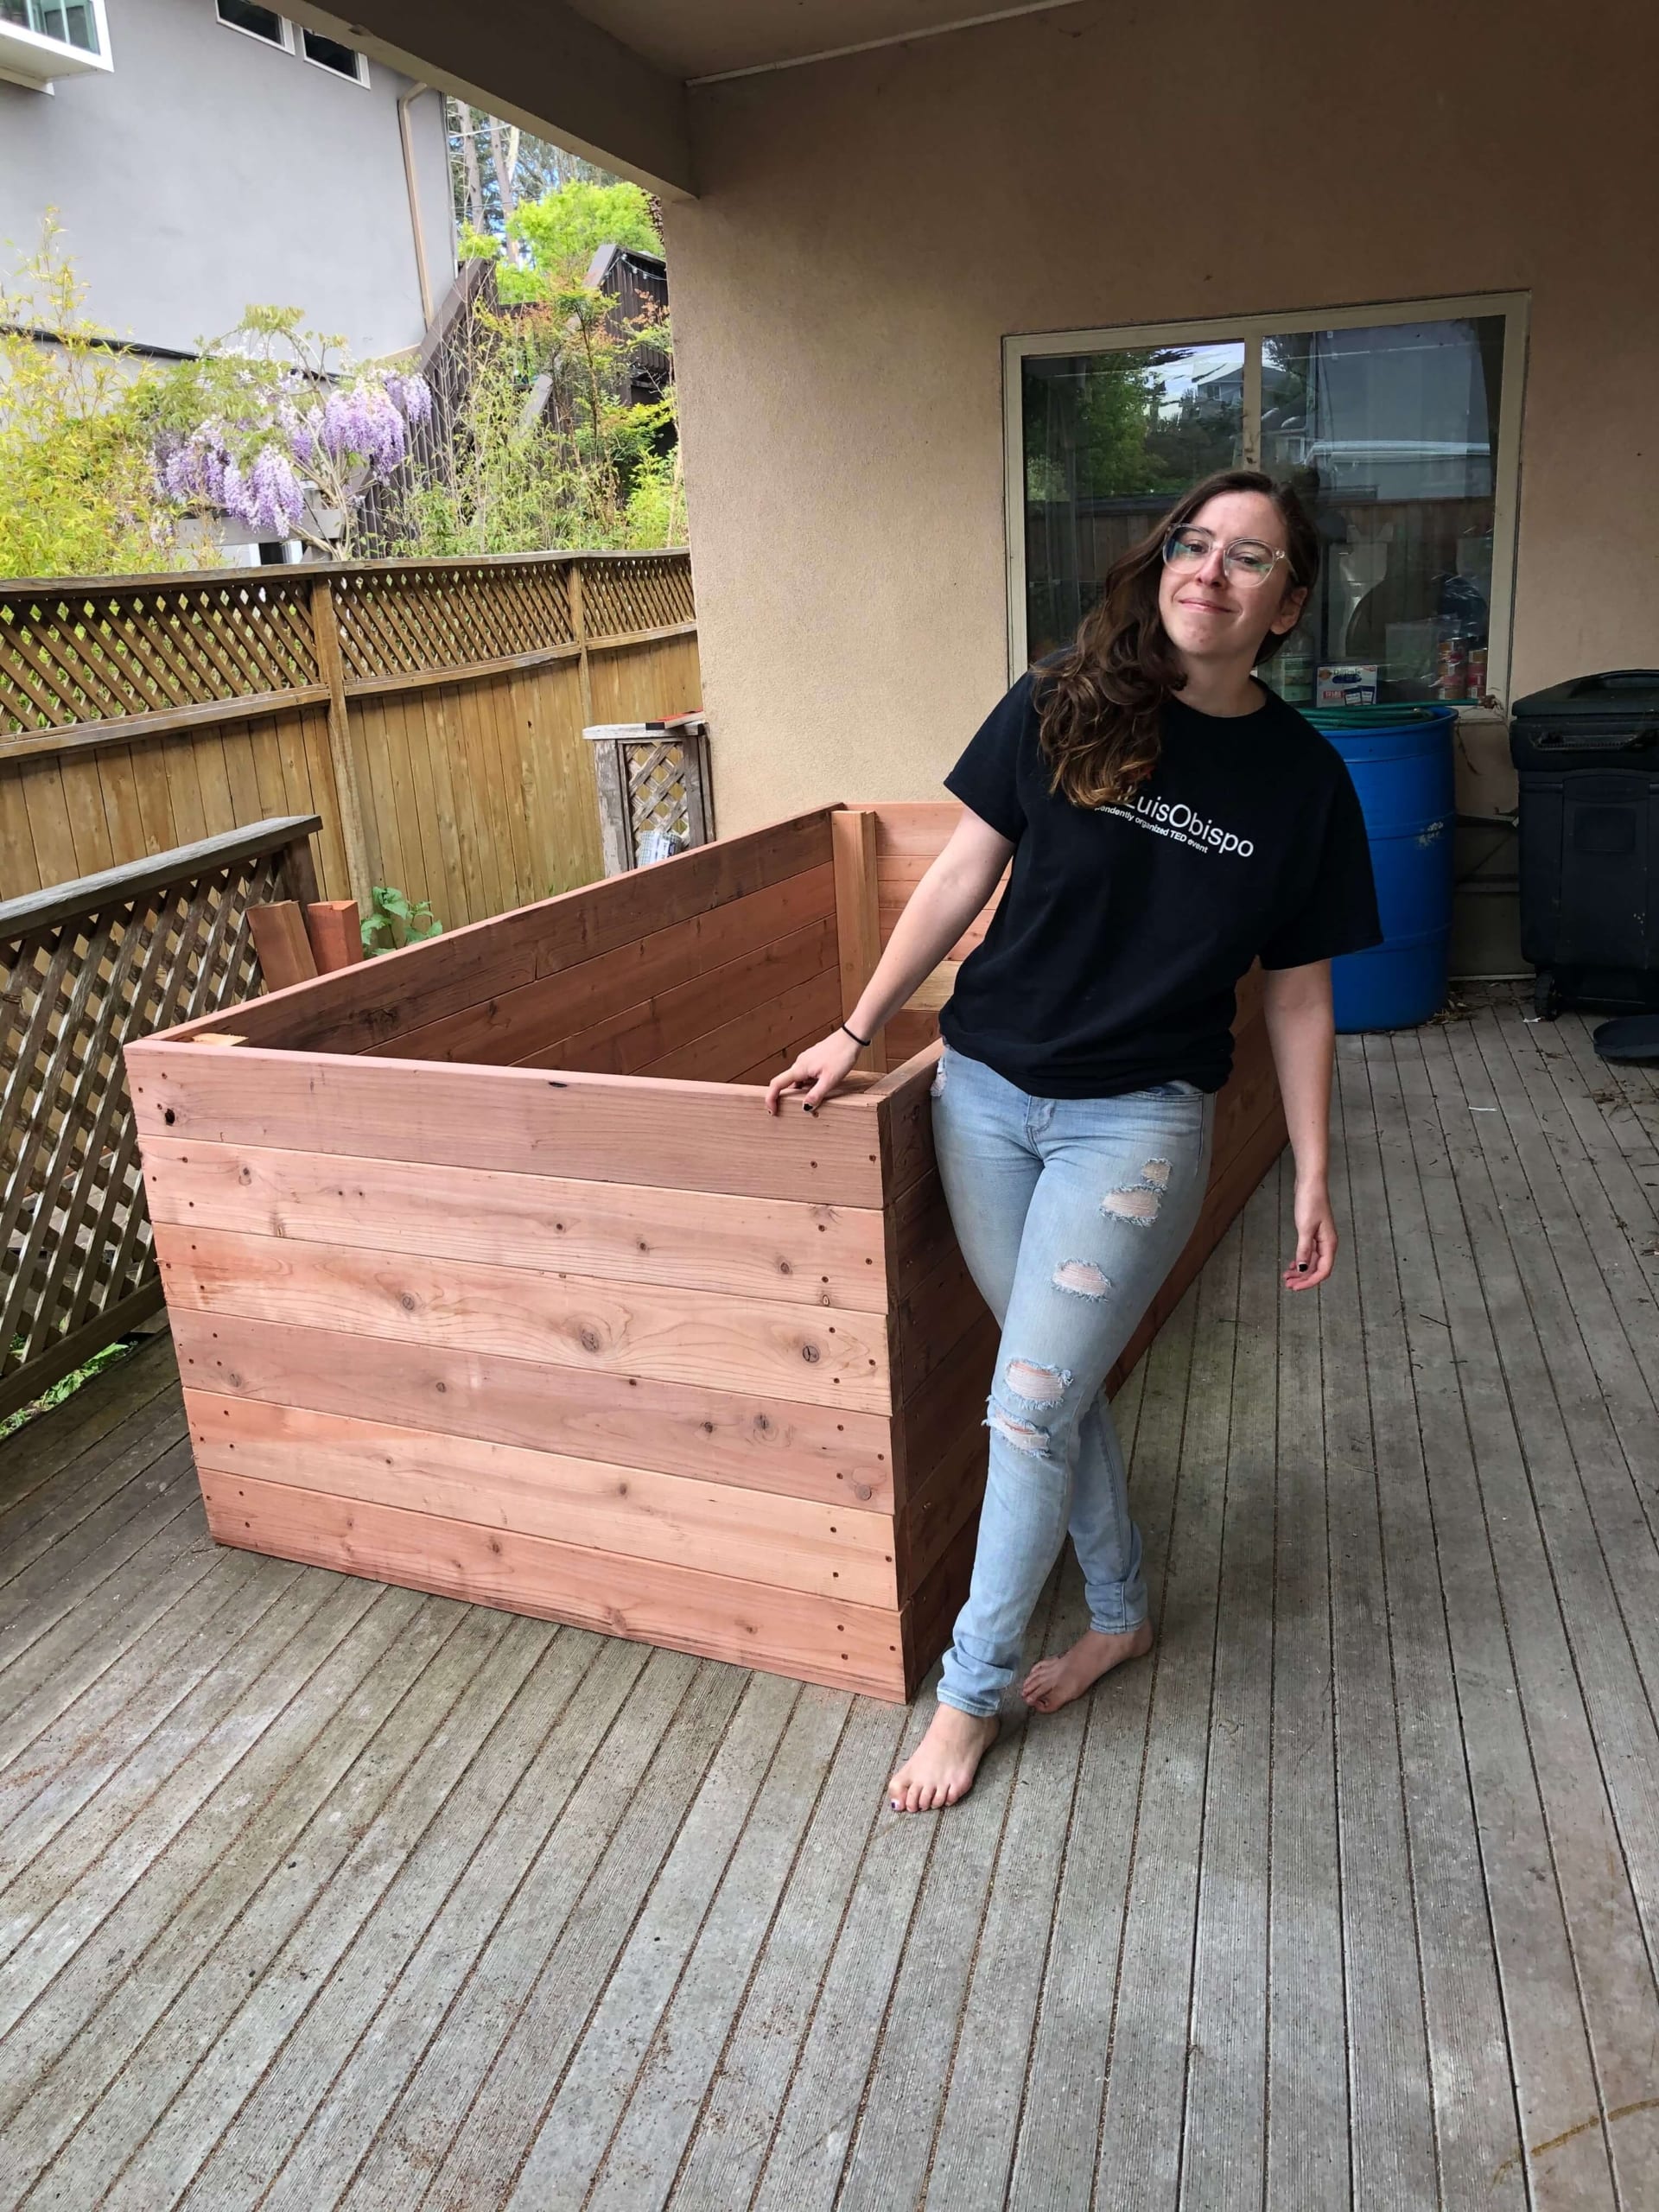 The author poses with the garden box she built from scratch during COVID-19 quarantine.